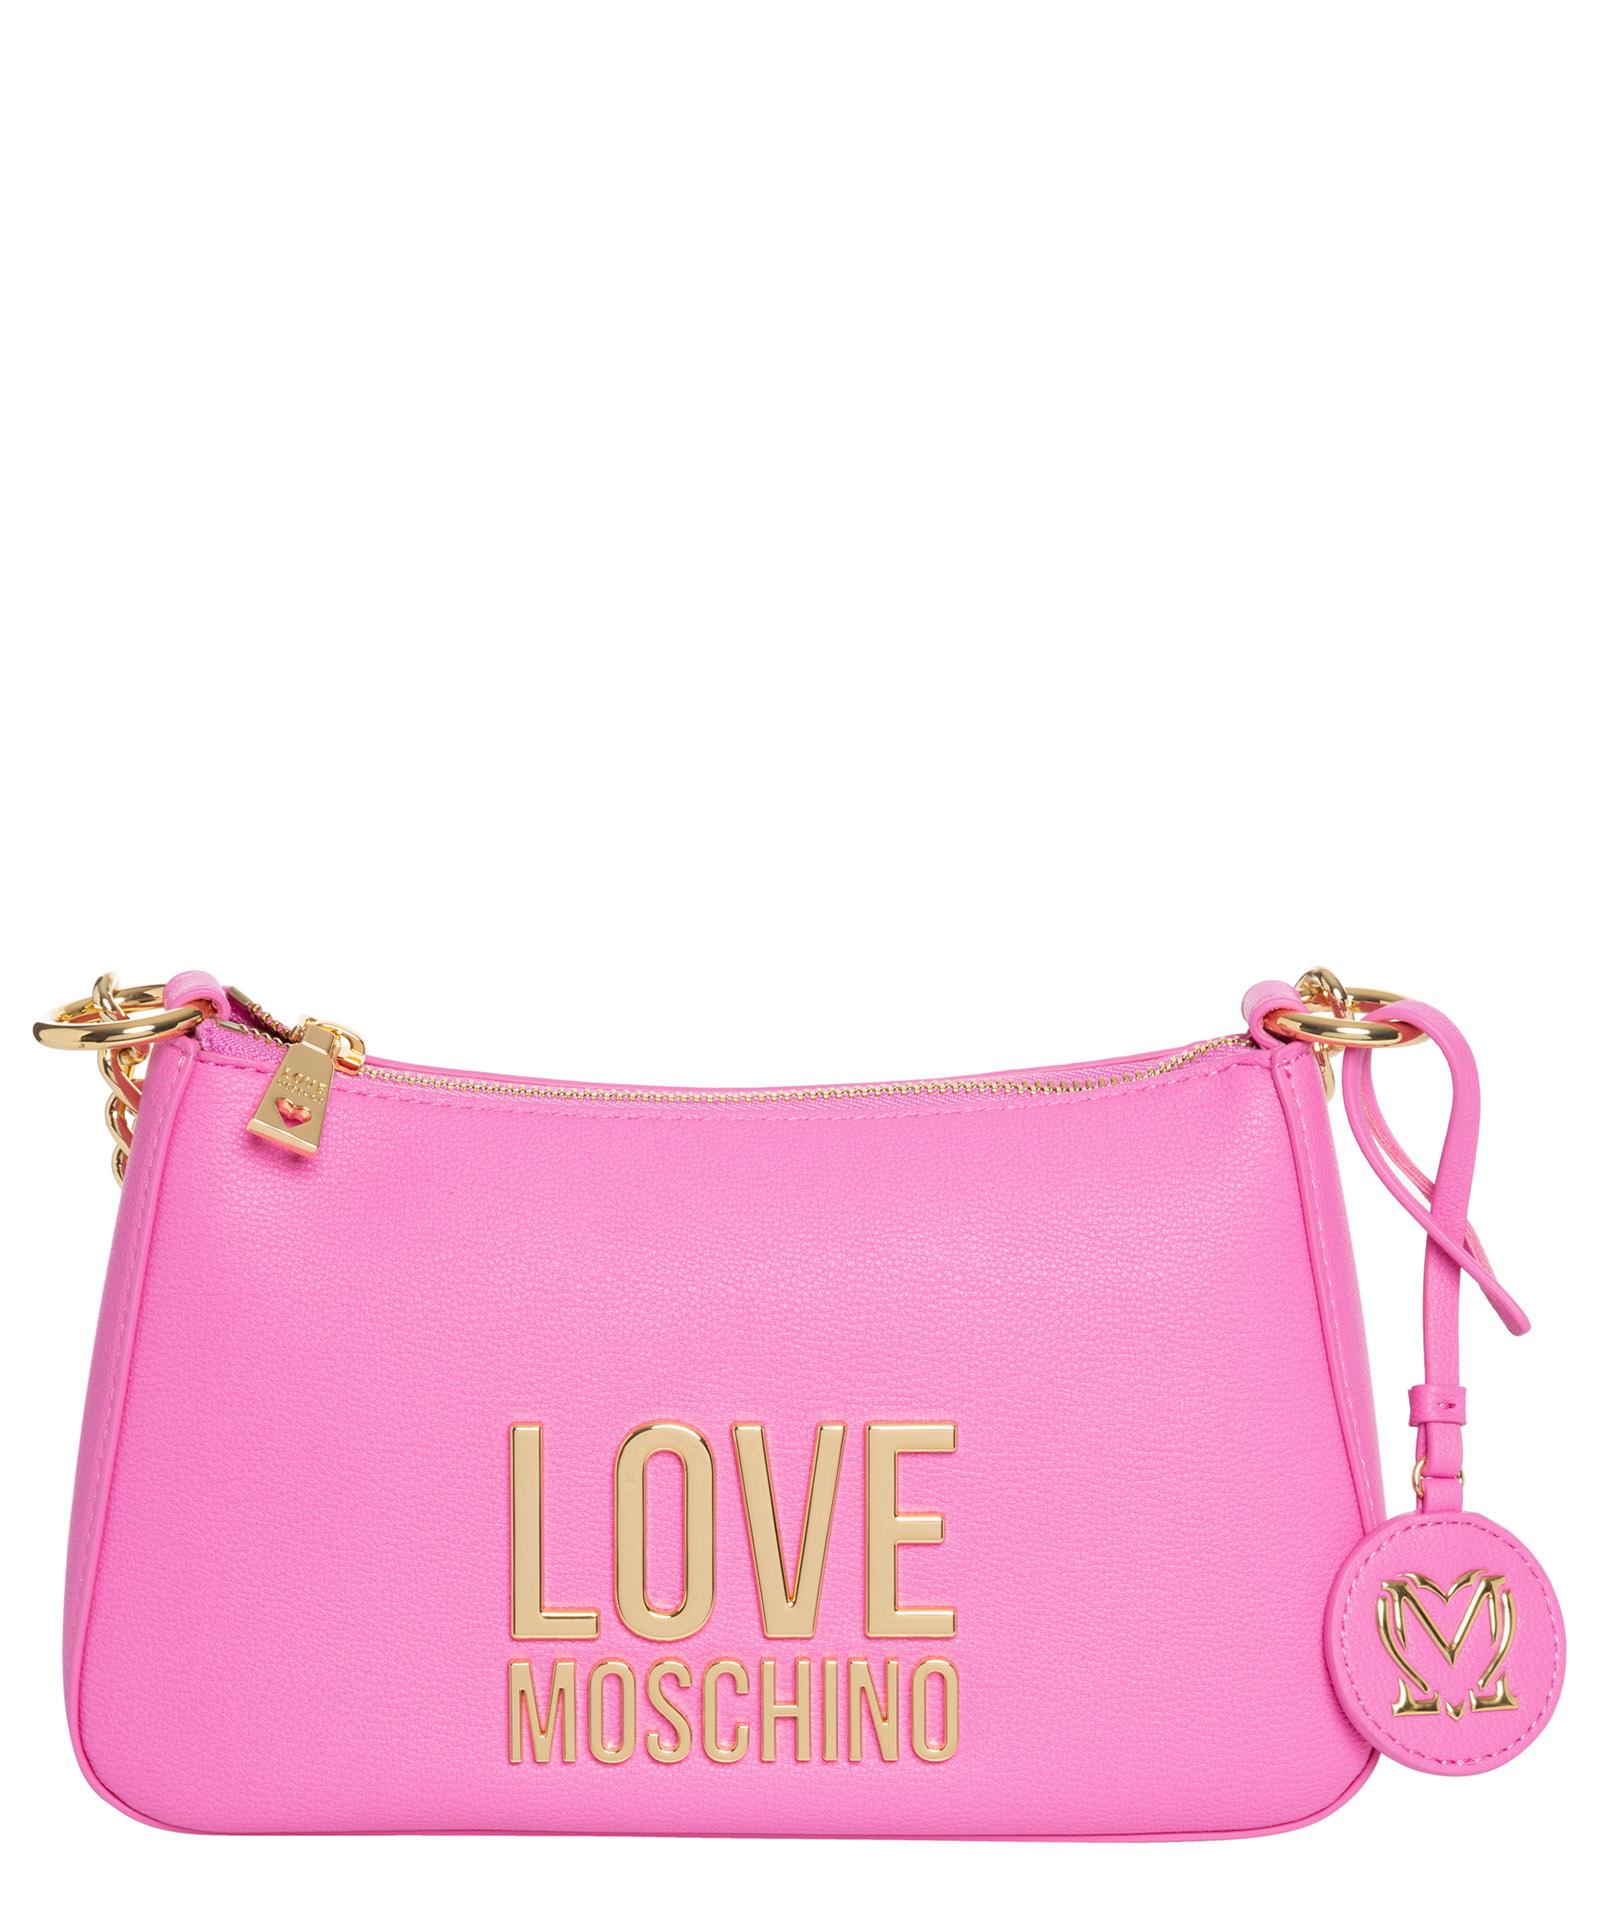 Love Moschino Shoulder Bag in Pink | Lyst